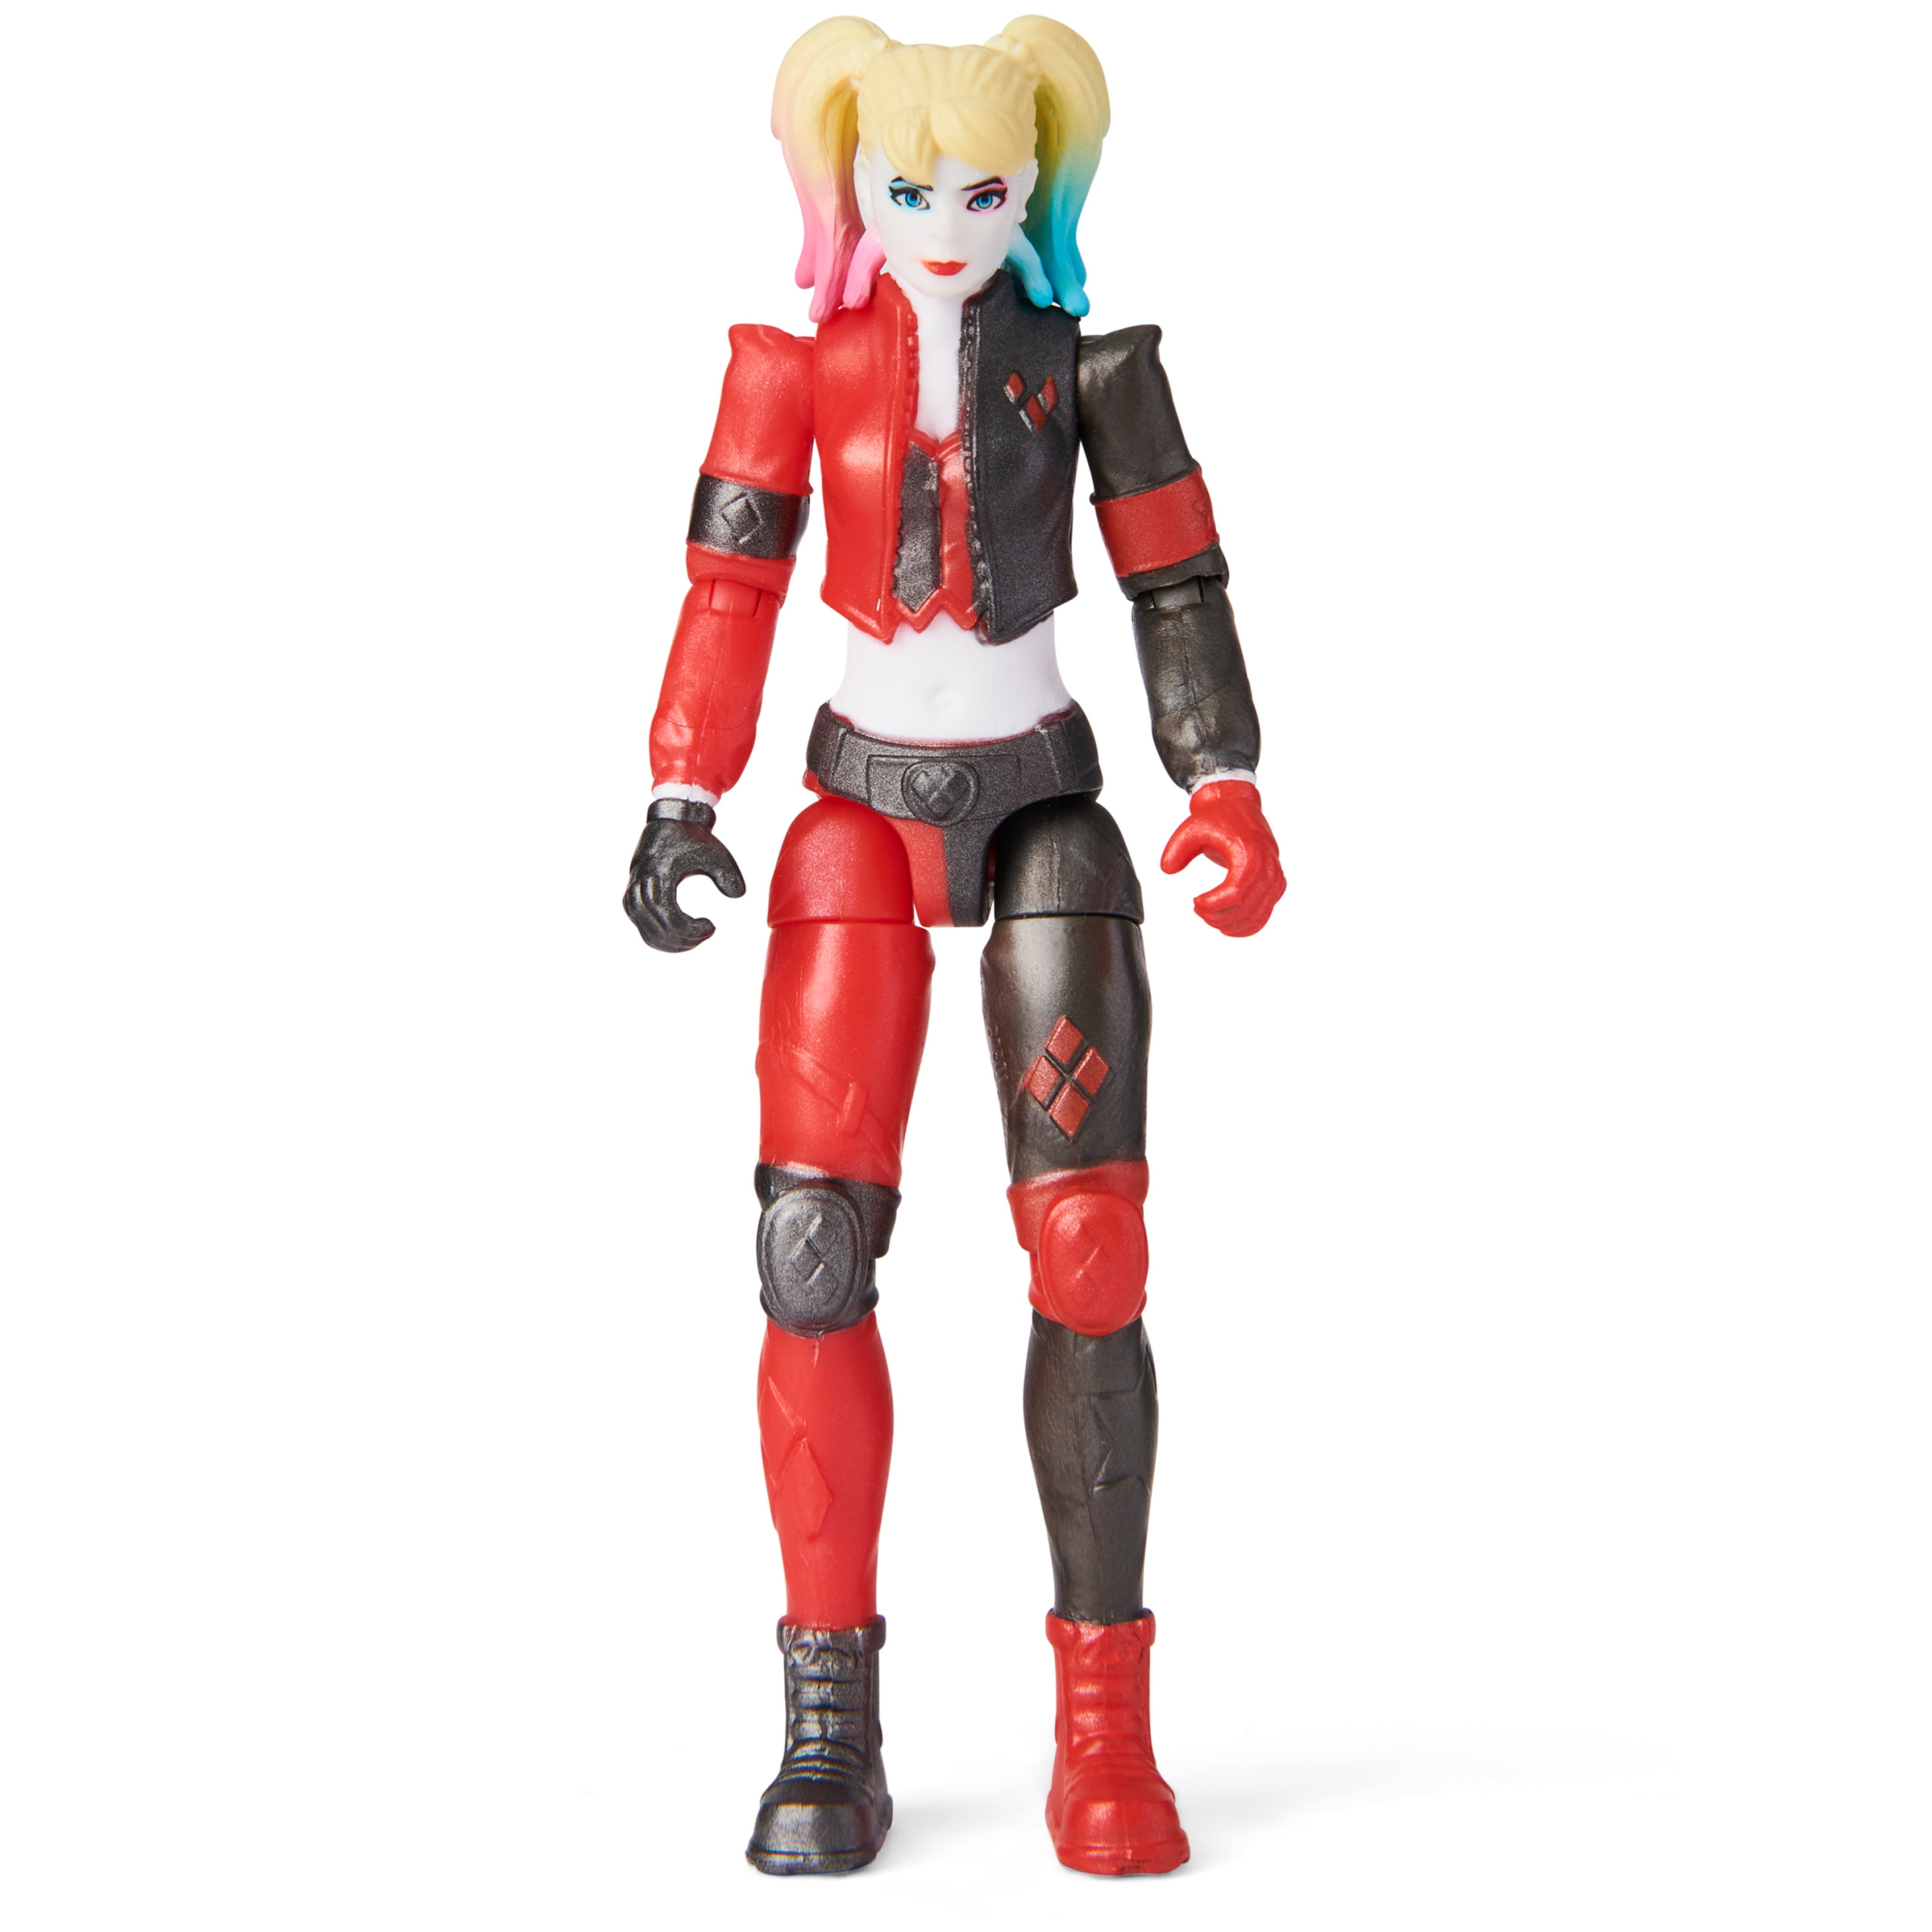 Batman 4-inch Harley Quinn Action Figure with 3 Mystery Accessories, for  Kids Aged 3 and up 